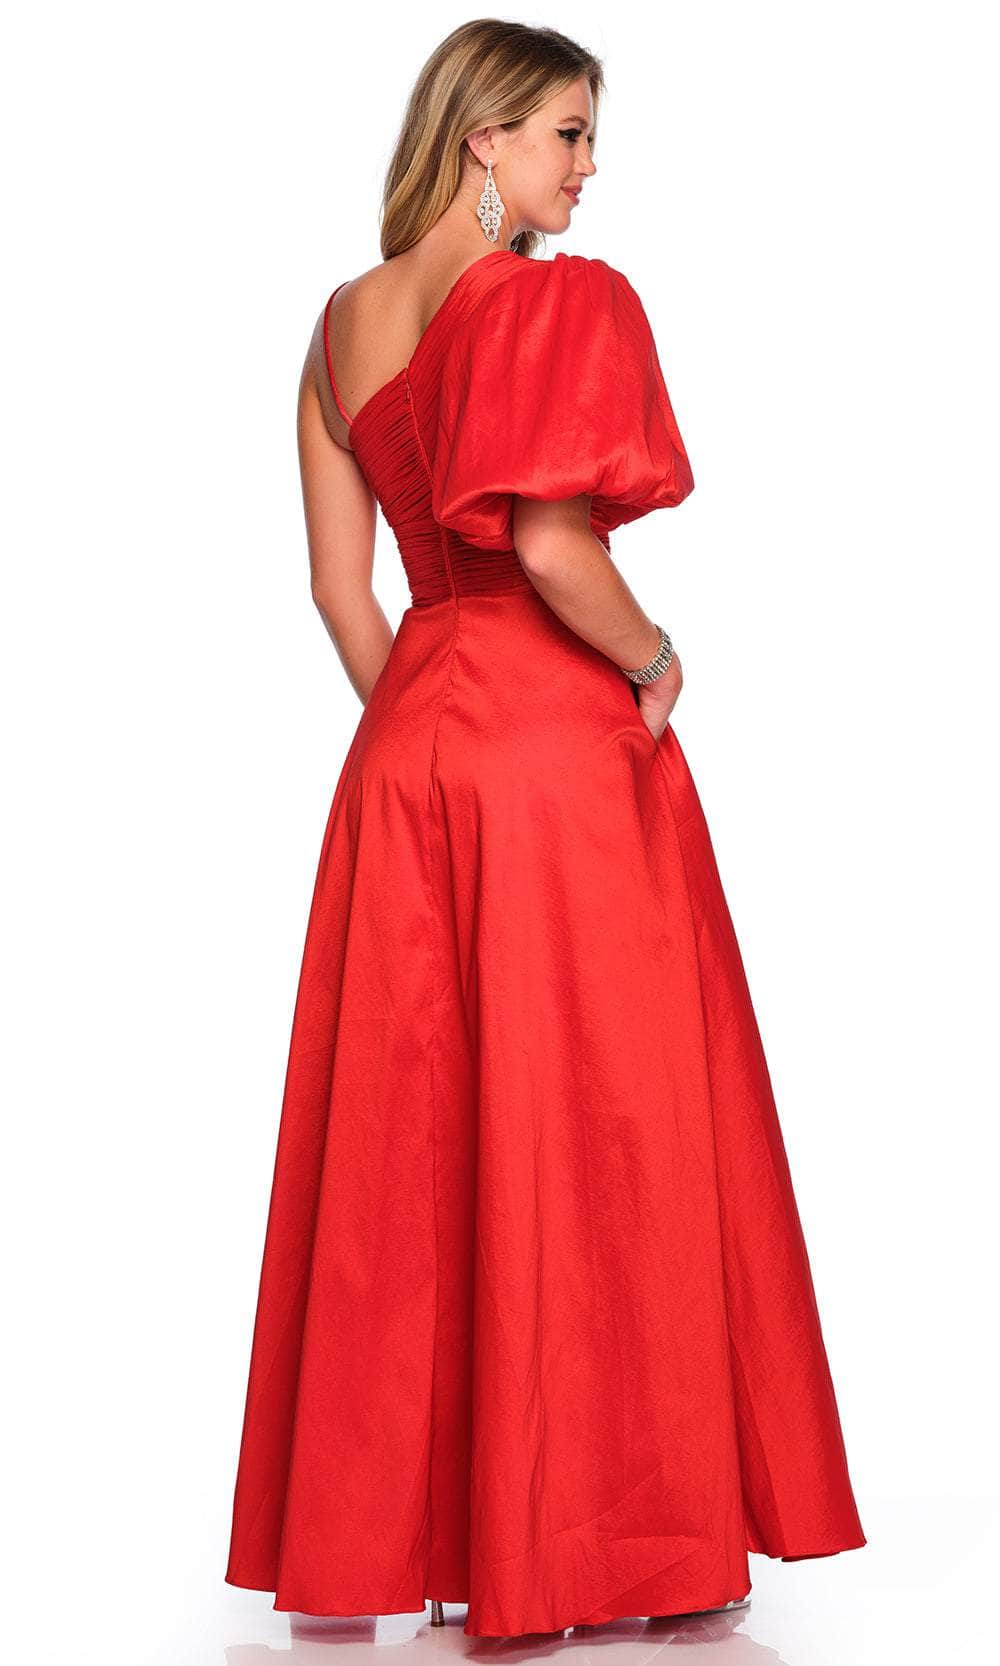 Dave & Johnny 11577 - A-Line One-Sleeve Gown Special Occasion Dress